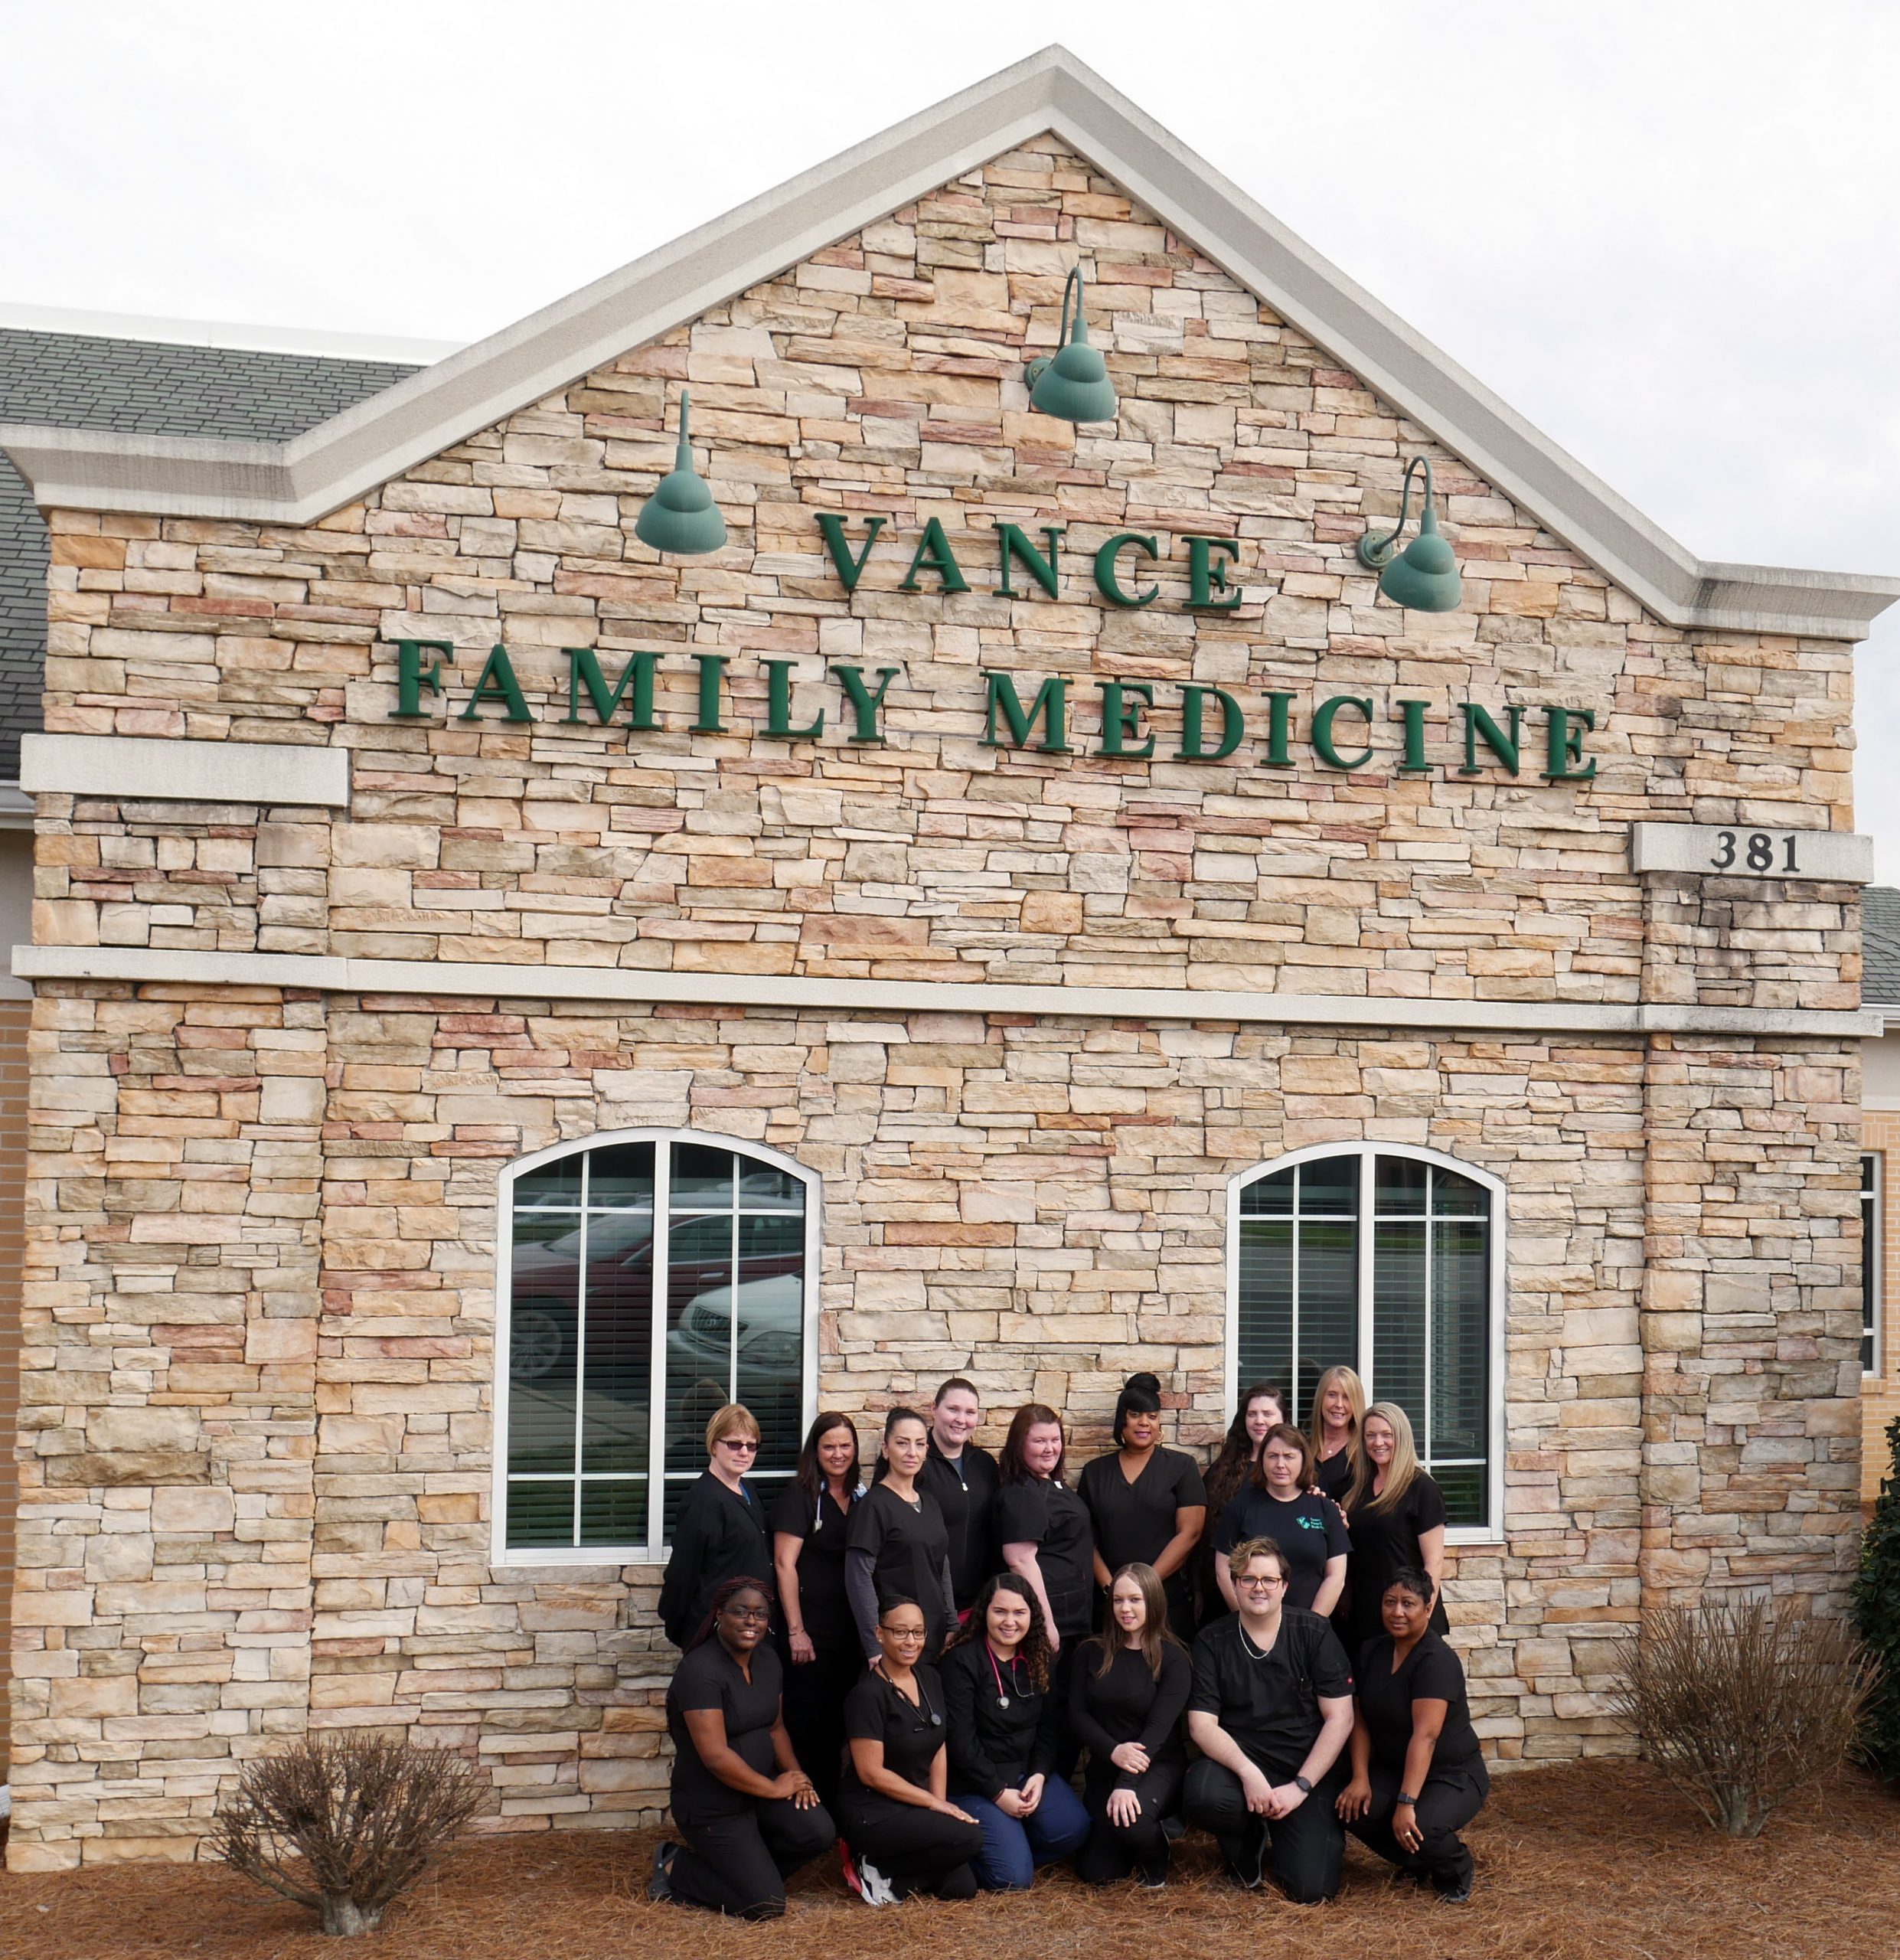 Vance Family Medicine Healthcare for Your Lifetime in Henderson, NC